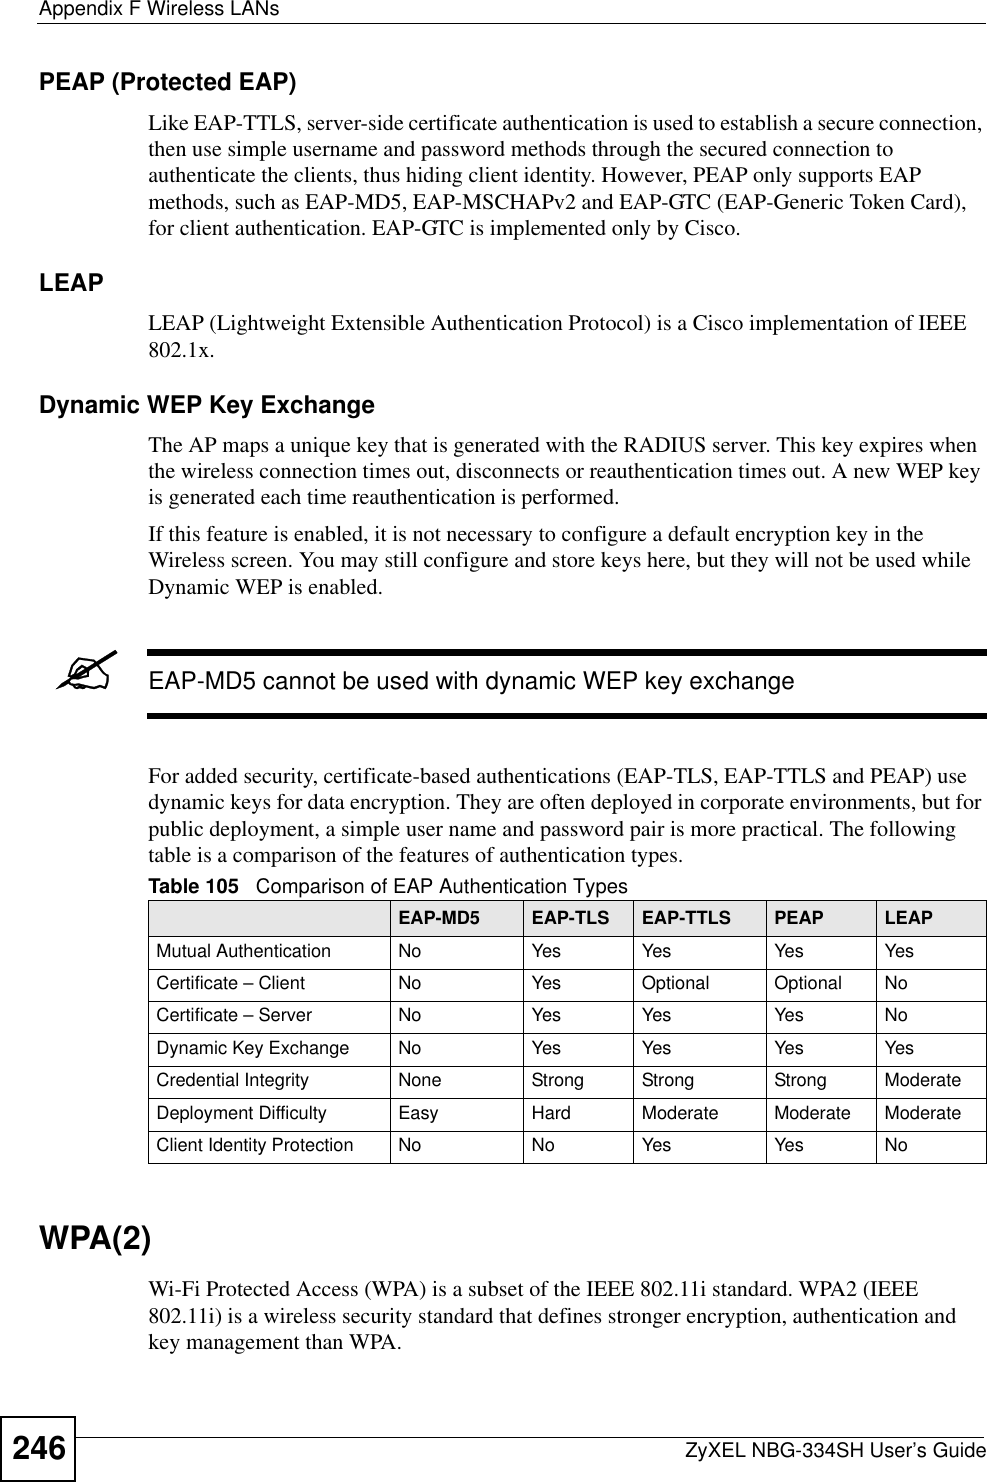 Appendix F Wireless LANsZyXEL NBG-334SH User’s Guide246PEAP (Protected EAP)Like EAP-TTLS, server-side certificate authentication is used to establish a secure connection, then use simple username and password methods through the secured connection to authenticate the clients, thus hiding client identity. However, PEAP only supports EAP methods, such as EAP-MD5, EAP-MSCHAPv2 and EAP-GTC (EAP-Generic Token Card), for client authentication. EAP-GTC is implemented only by Cisco.LEAPLEAP (Lightweight Extensible Authentication Protocol) is a Cisco implementation of IEEE 802.1x. Dynamic WEP Key ExchangeThe AP maps a unique key that is generated with the RADIUS server. This key expires when the wireless connection times out, disconnects or reauthentication times out. A new WEP key is generated each time reauthentication is performed.If this feature is enabled, it is not necessary to configure a default encryption key in the Wireless screen. You may still configure and store keys here, but they will not be used while Dynamic WEP is enabled.&quot;EAP-MD5 cannot be used with dynamic WEP key exchangeFor added security, certificate-based authentications (EAP-TLS, EAP-TTLS and PEAP) use dynamic keys for data encryption. They are often deployed in corporate environments, but for public deployment, a simple user name and password pair is more practical. The following table is a comparison of the features of authentication types.WPA(2)Wi-Fi Protected Access (WPA) is a subset of the IEEE 802.11i standard. WPA2 (IEEE 802.11i) is a wireless security standard that defines stronger encryption, authentication and key management than WPA. Table 105   Comparison of EAP Authentication TypesEAP-MD5 EAP-TLS EAP-TTLS PEAP LEAPMutual Authentication No Yes Yes Yes YesCertificate – Client No Yes Optional Optional NoCertificate – Server No Yes Yes Yes NoDynamic Key Exchange No Yes Yes Yes YesCredential Integrity None Strong Strong Strong ModerateDeployment Difficulty Easy Hard Moderate Moderate ModerateClient Identity Protection No No Yes Yes No